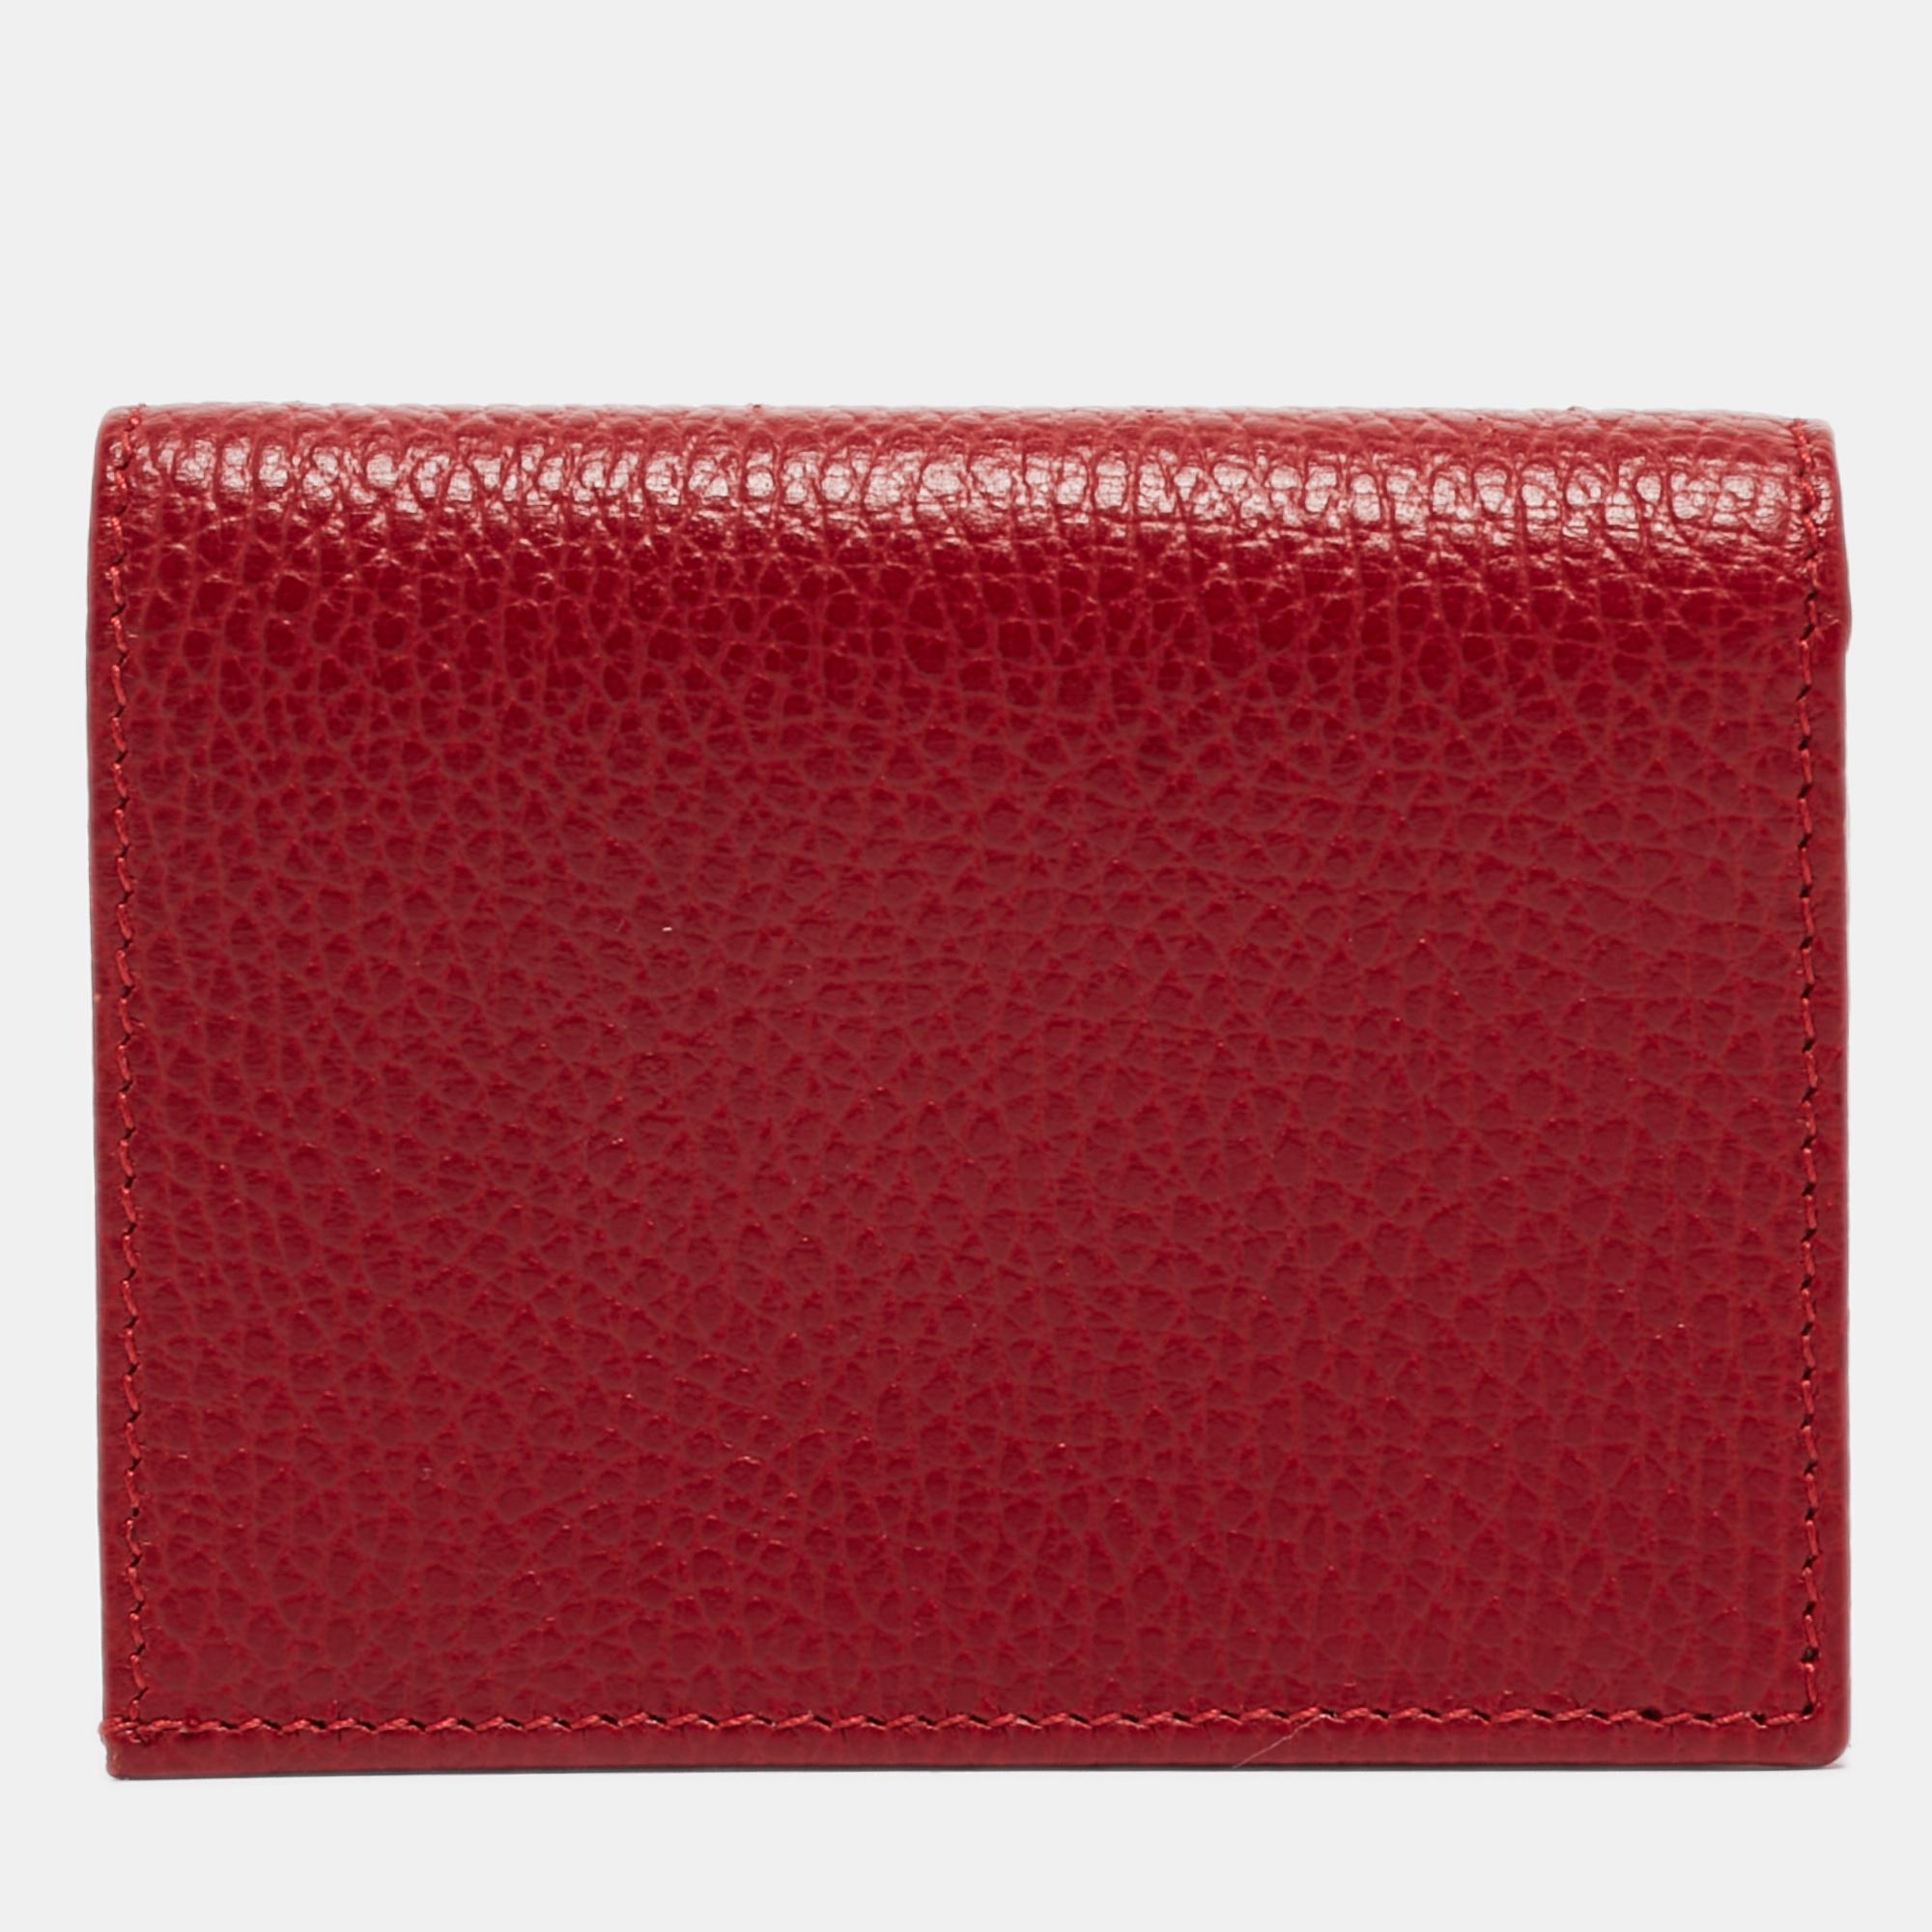 Embellished with signatory details of the House and carved precisely to perfection, this GG Marmont card case from Gucci will prove to be a super-useful, stylish accessory. It is made from red leather with the iconic GG motif attached to the front.